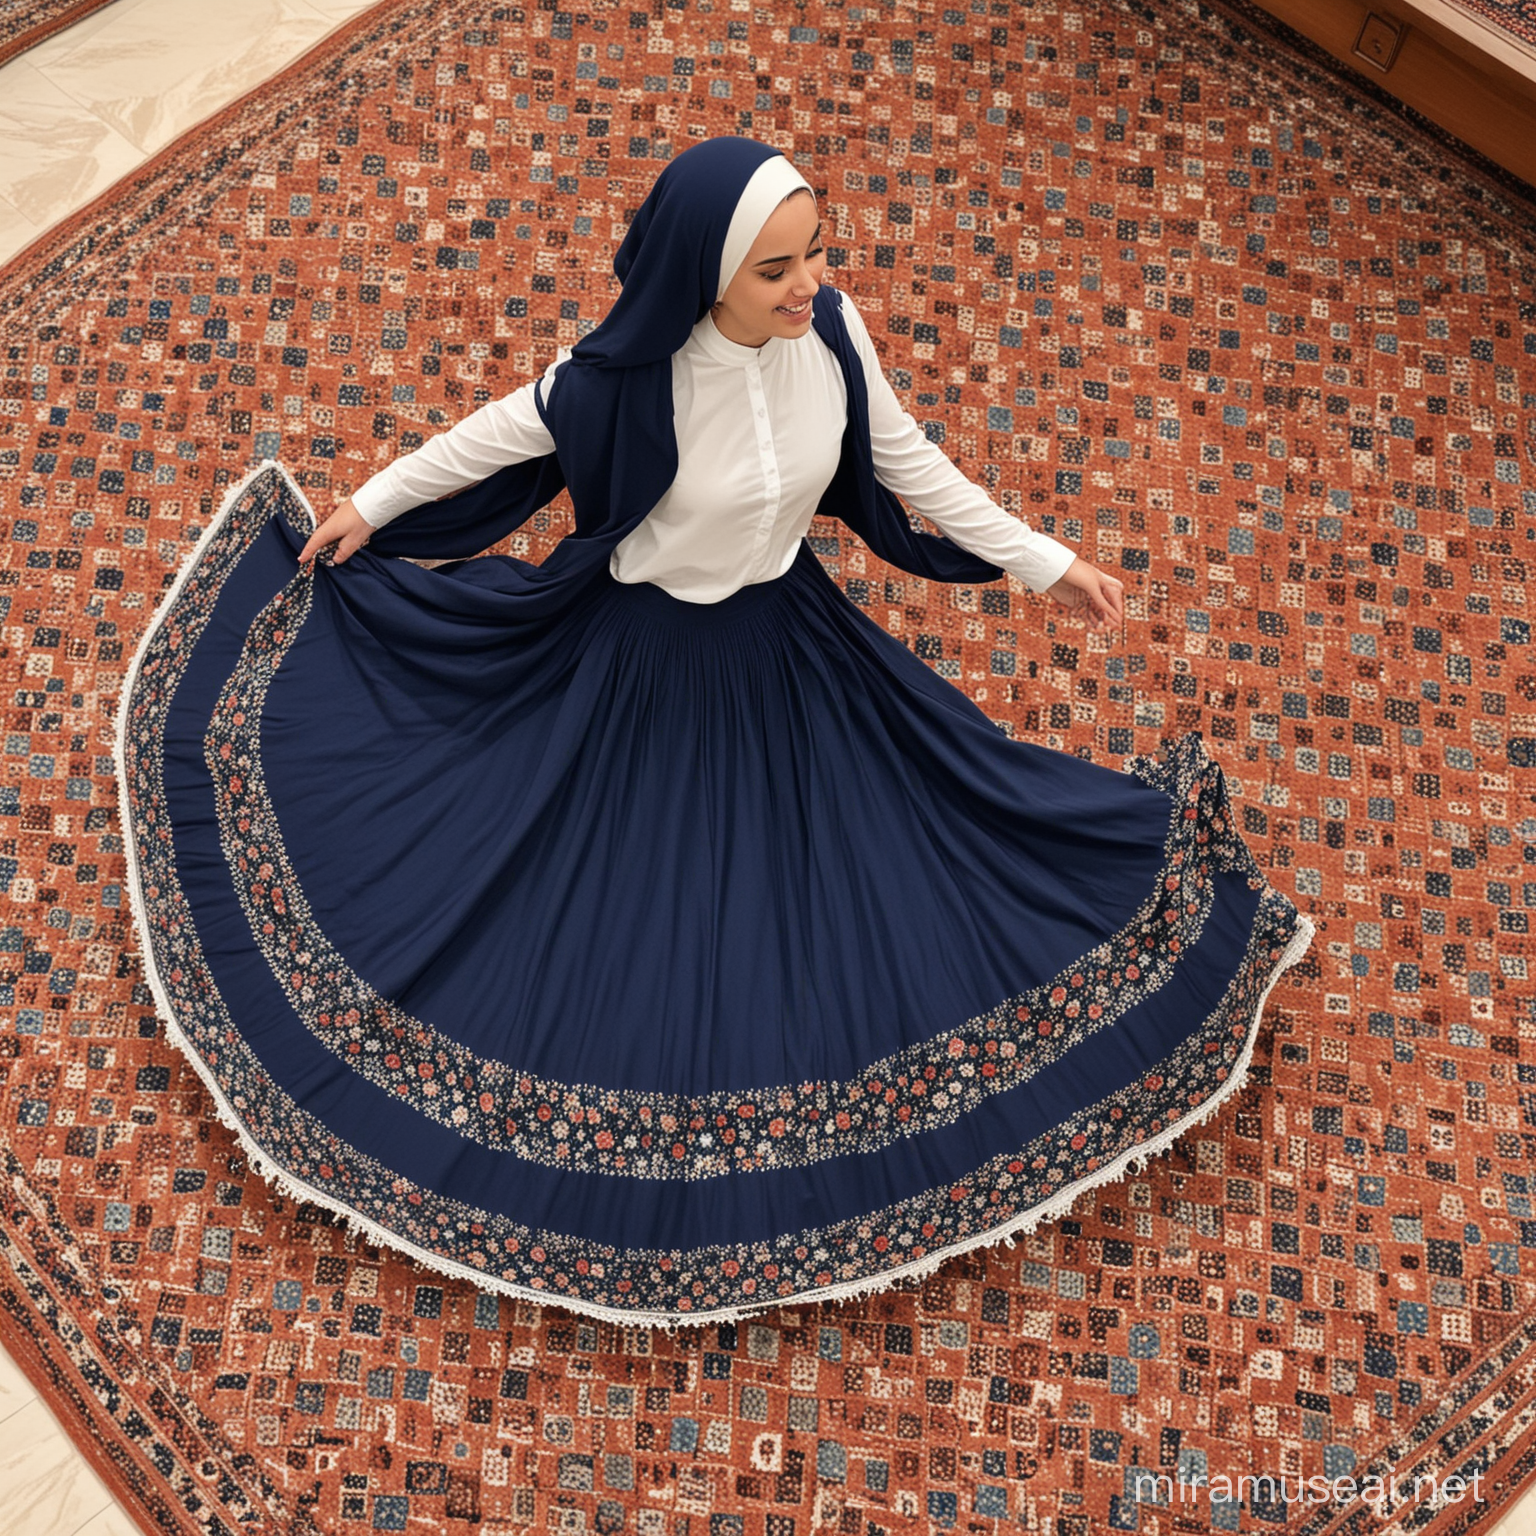 Young Woman in Hijab Spinning on Iranian Carpet